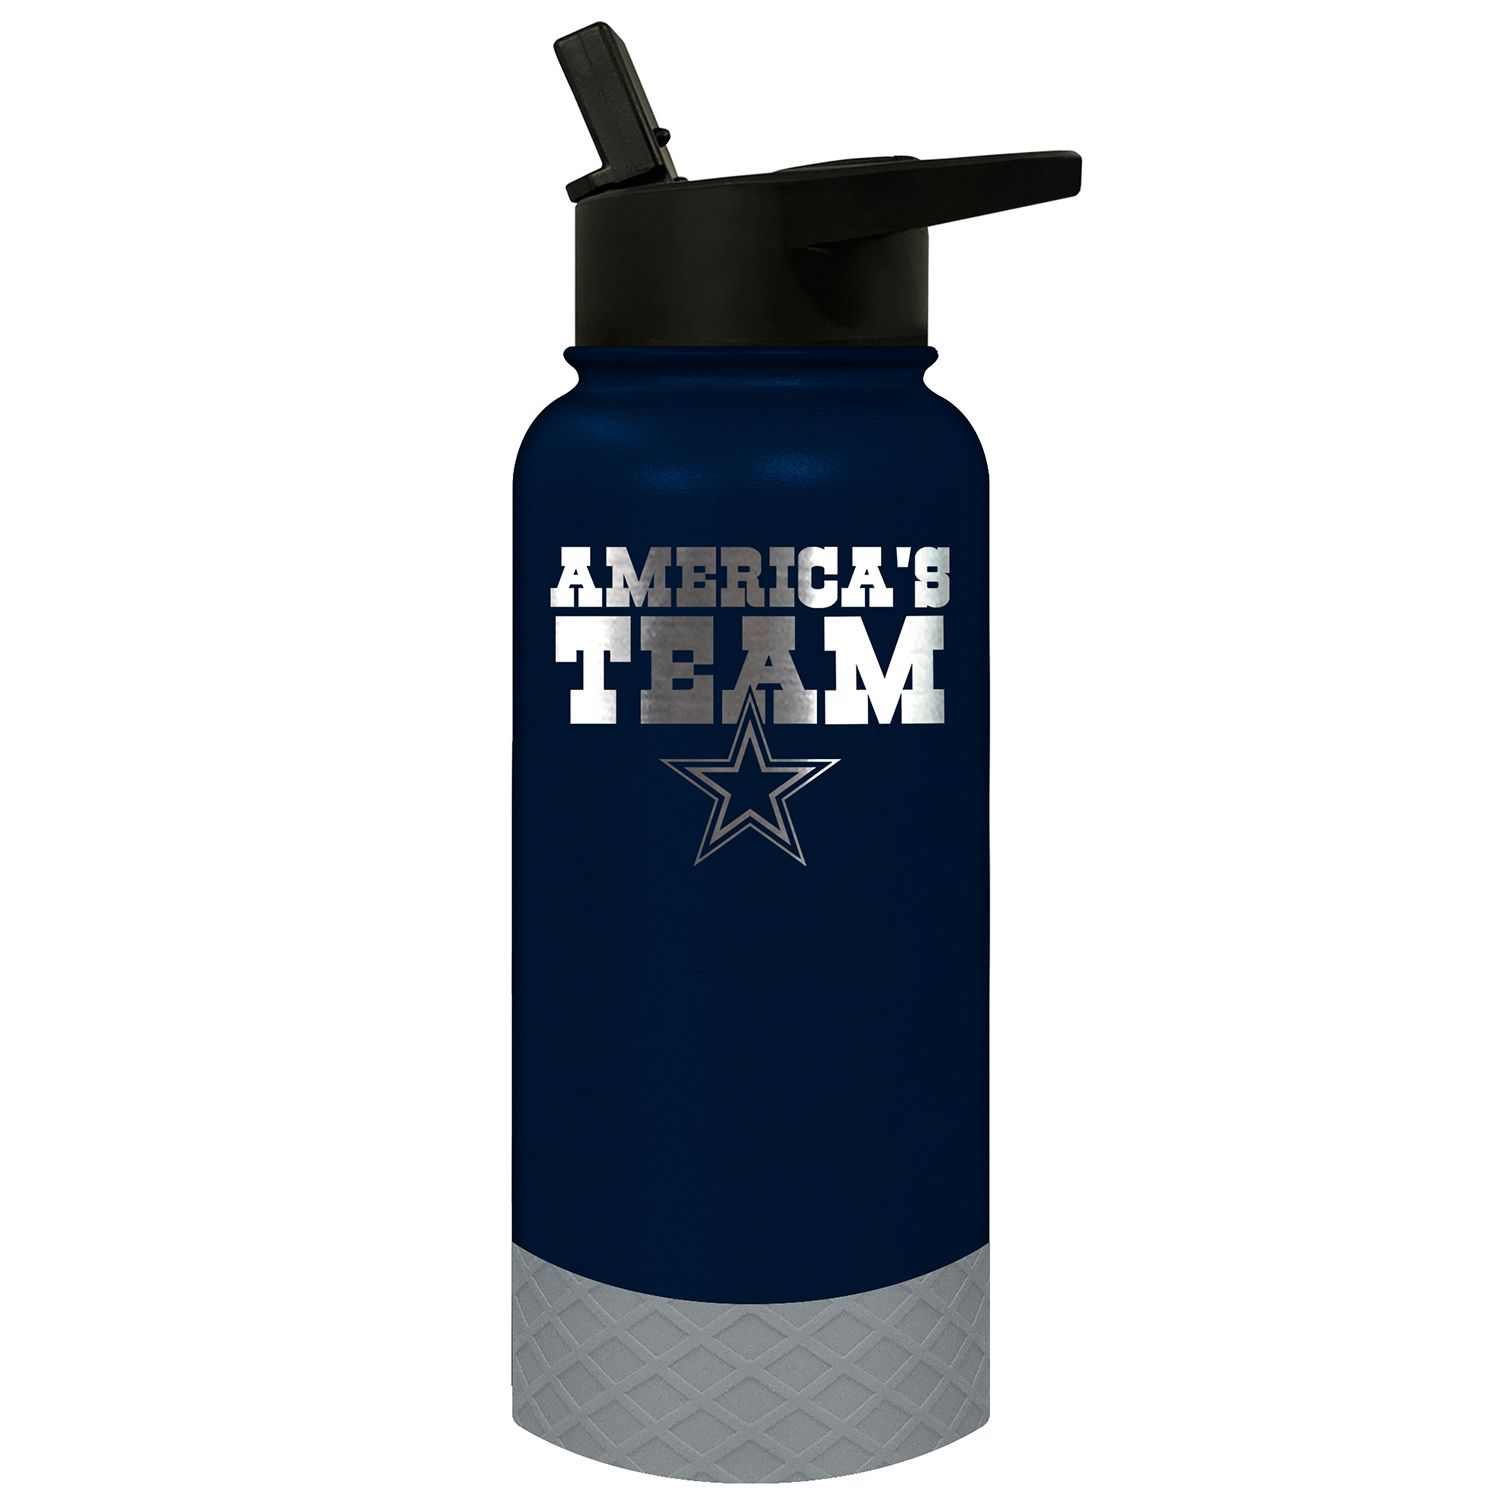 The Memory Company White Dallas Cowboys Personalized 30oz. Stainless Steel Bluetooth Tumbler